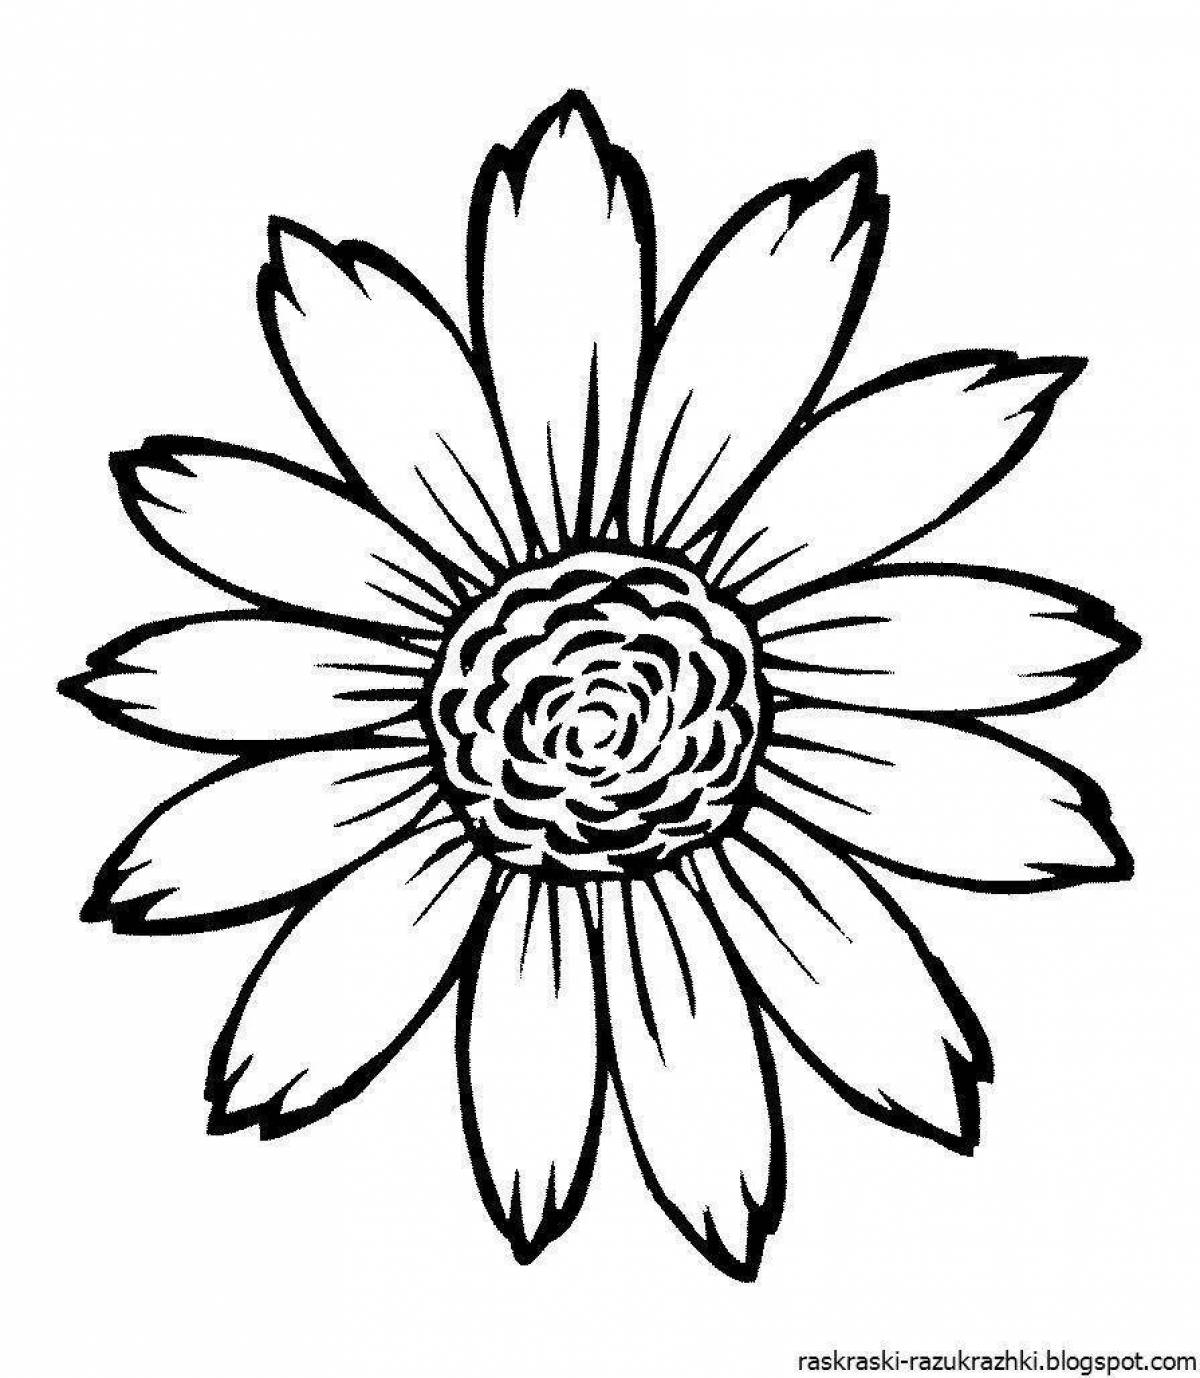 Wonderful daisy flower coloring for kids